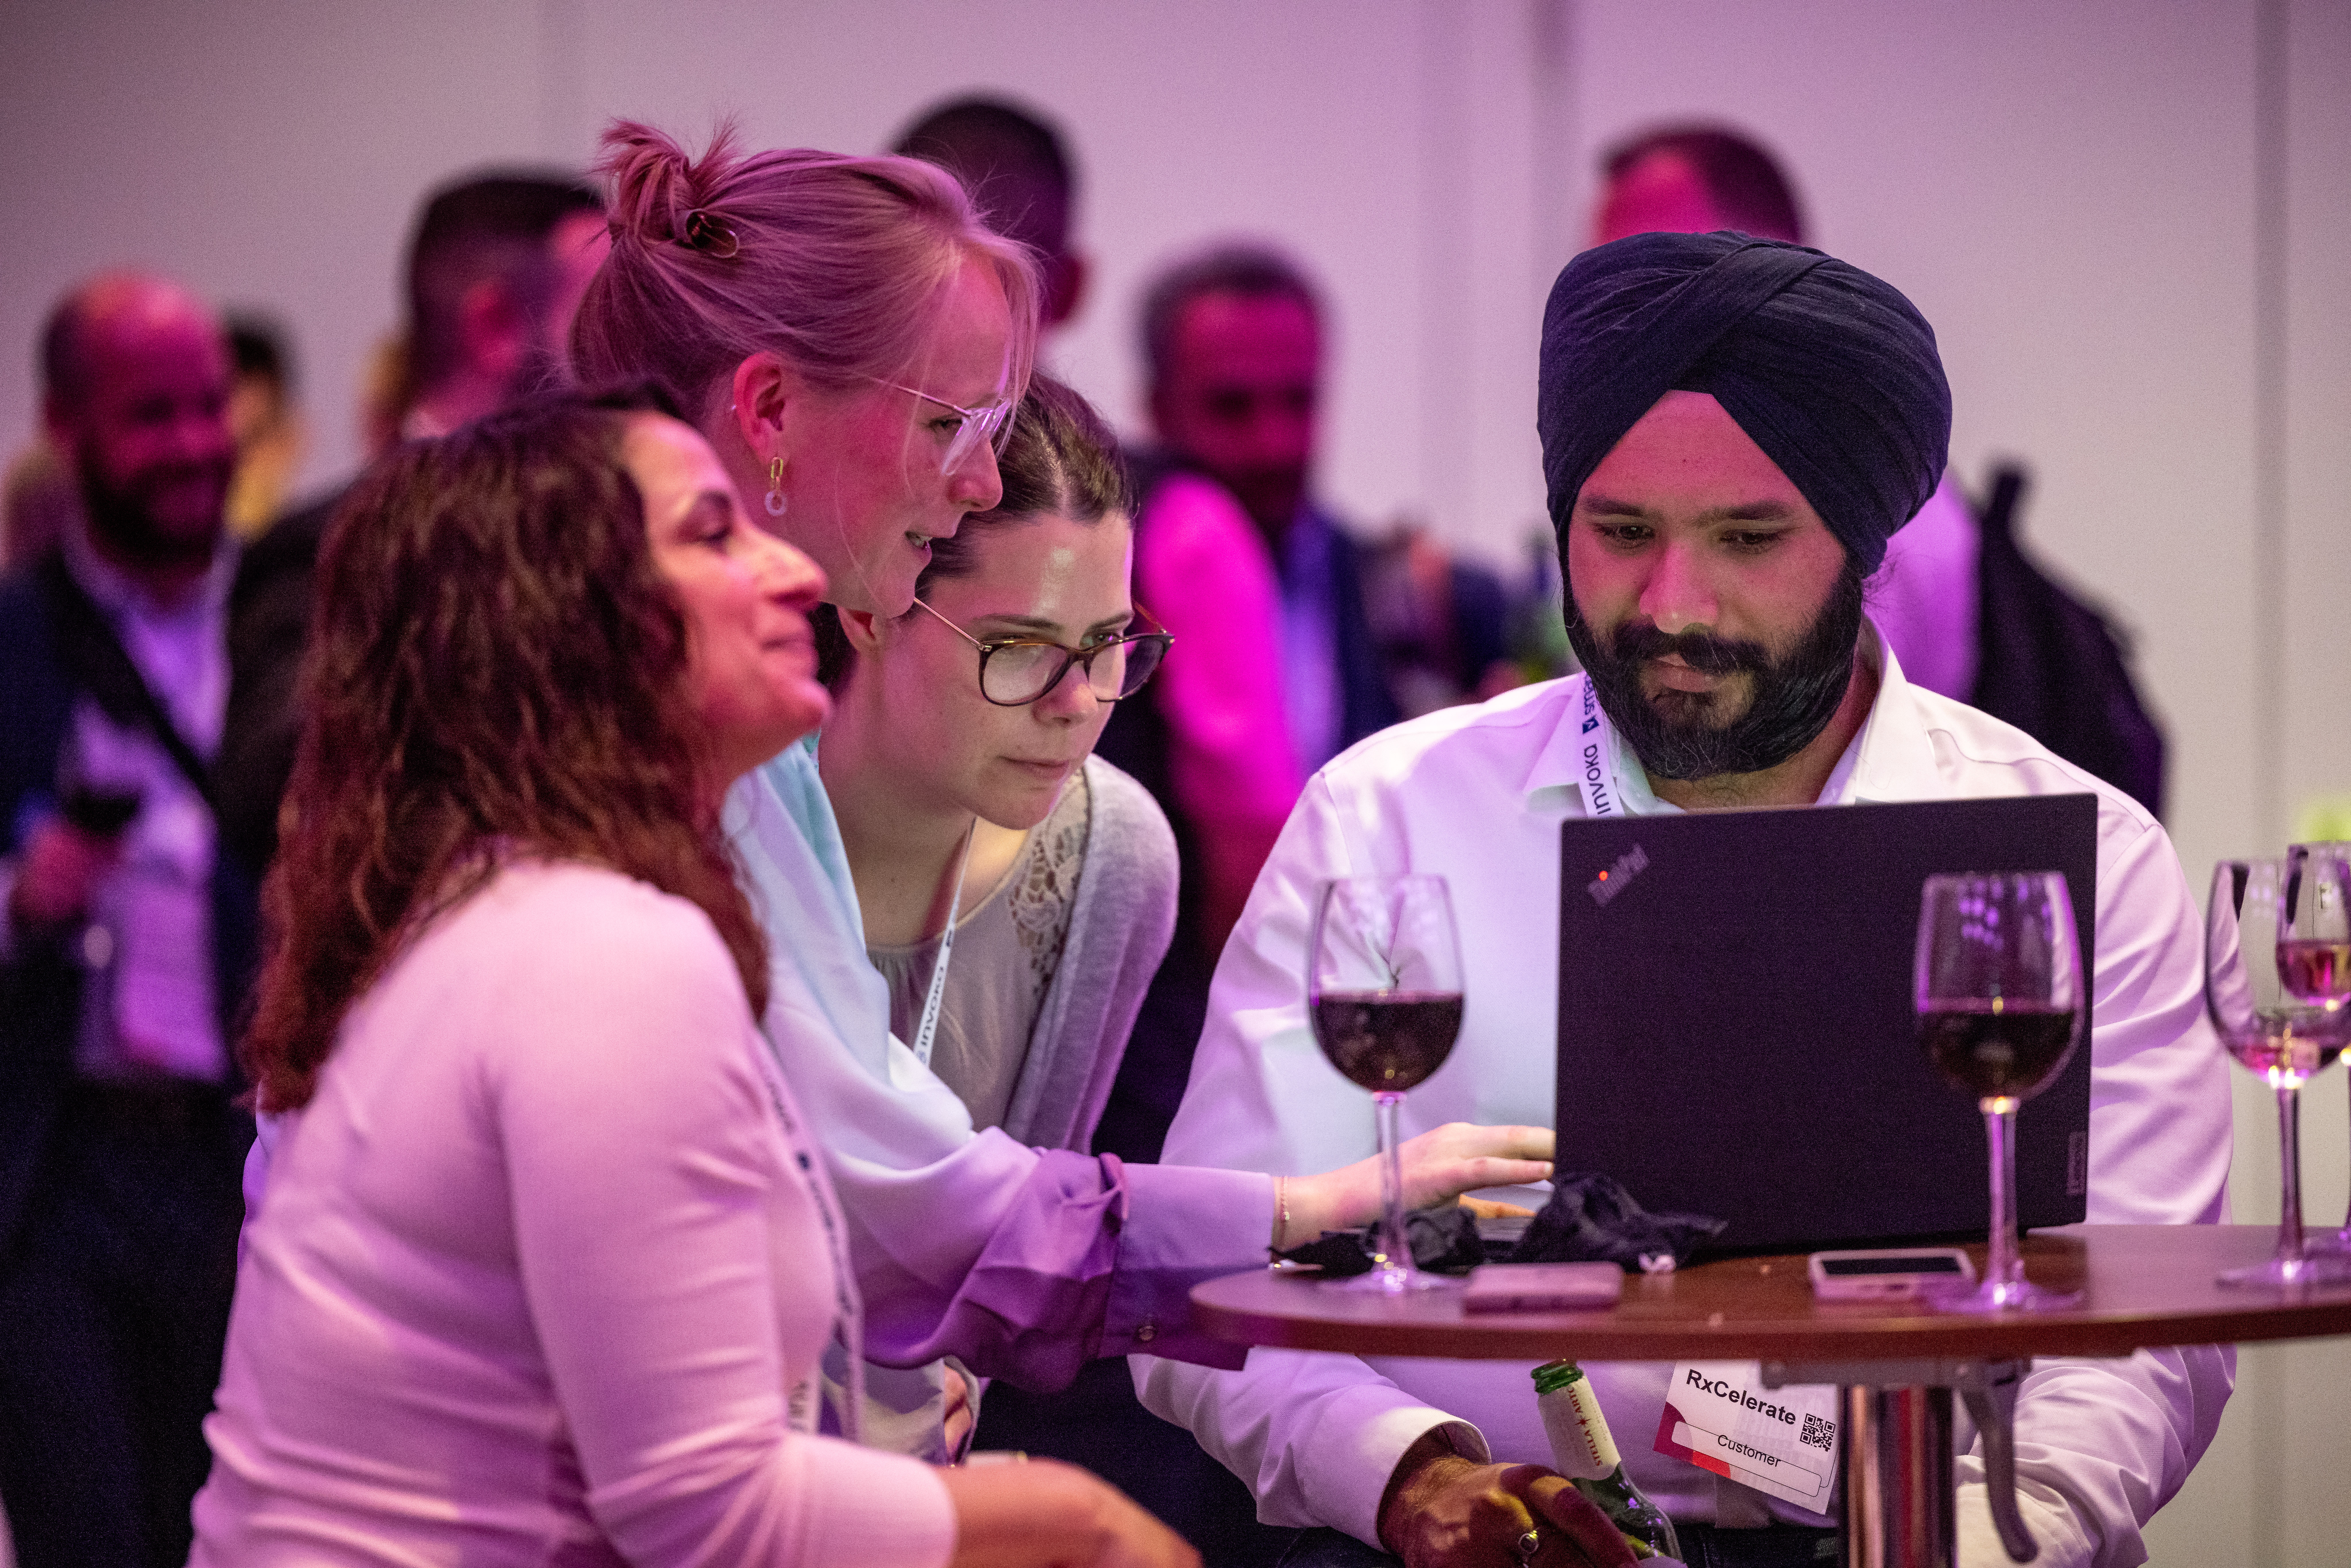 Attendees at Smartsheet ENGAGE in London chat over wine during the attendee reception.